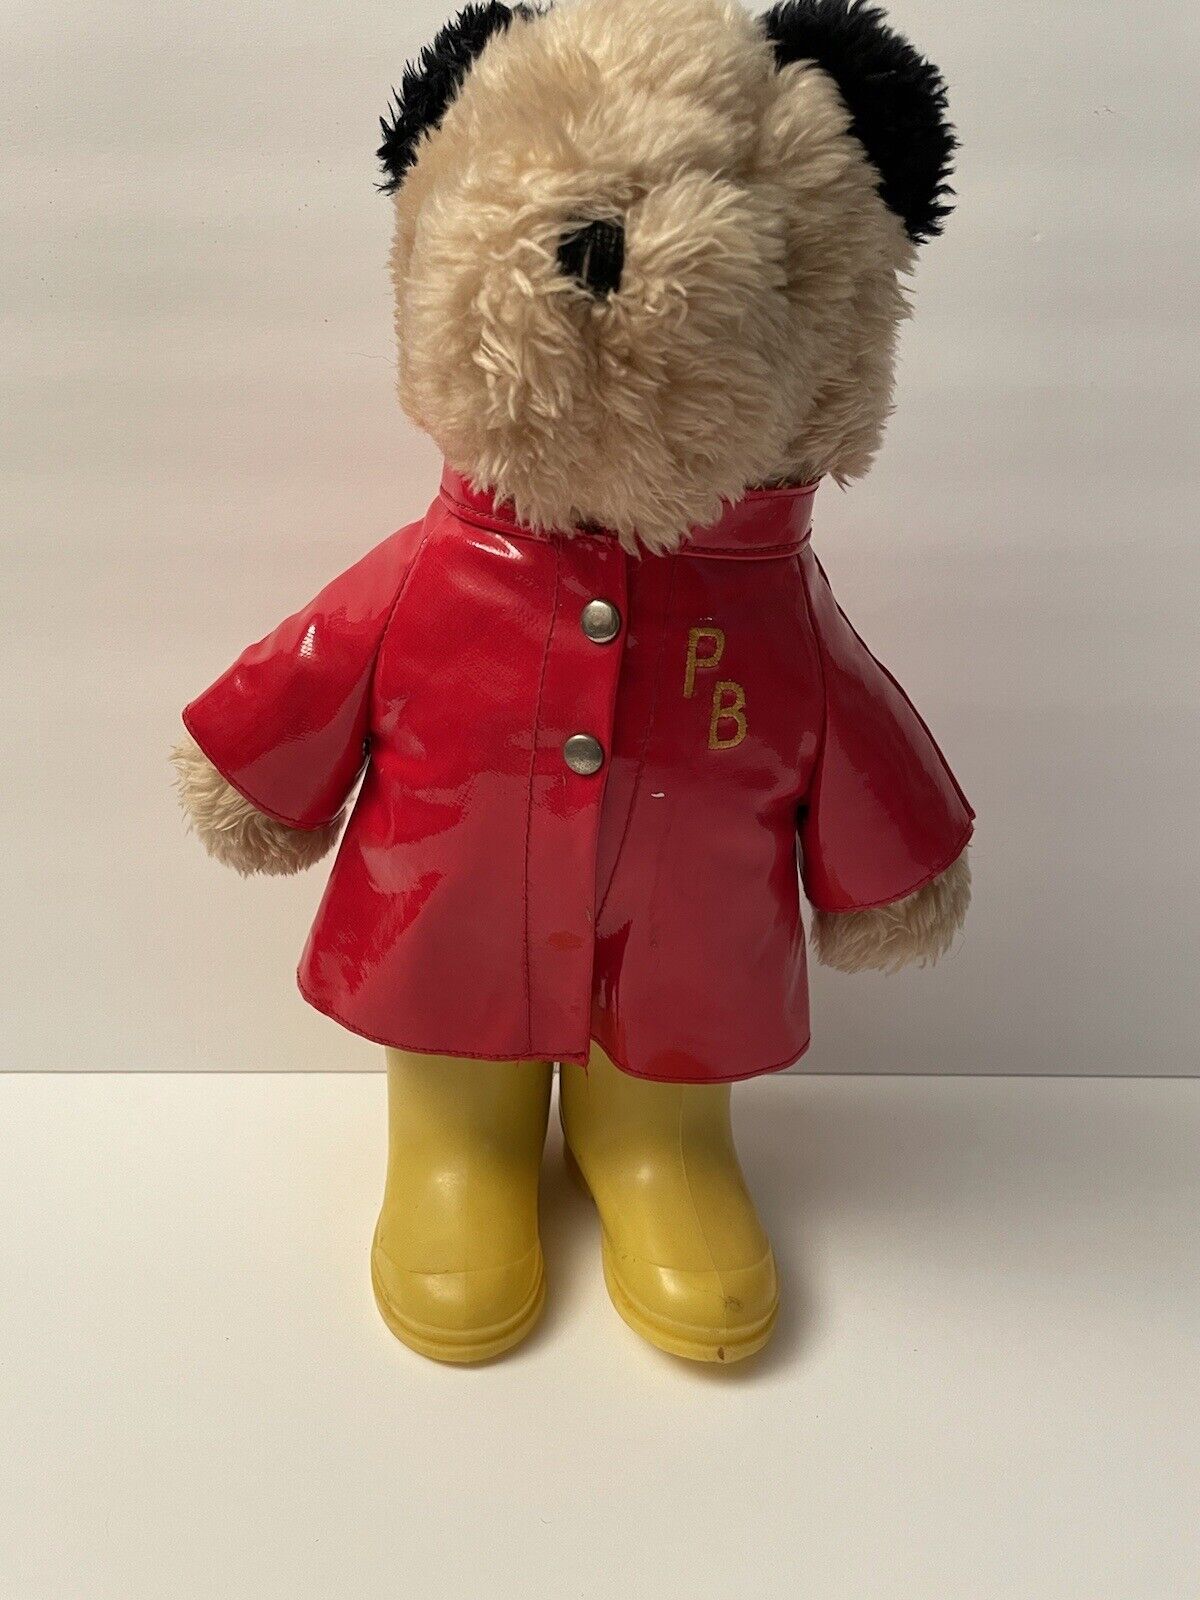 Vtg 1981 famous Paddington Bear Red Sales for sale Rain Coat Eden Yellow by To Boots